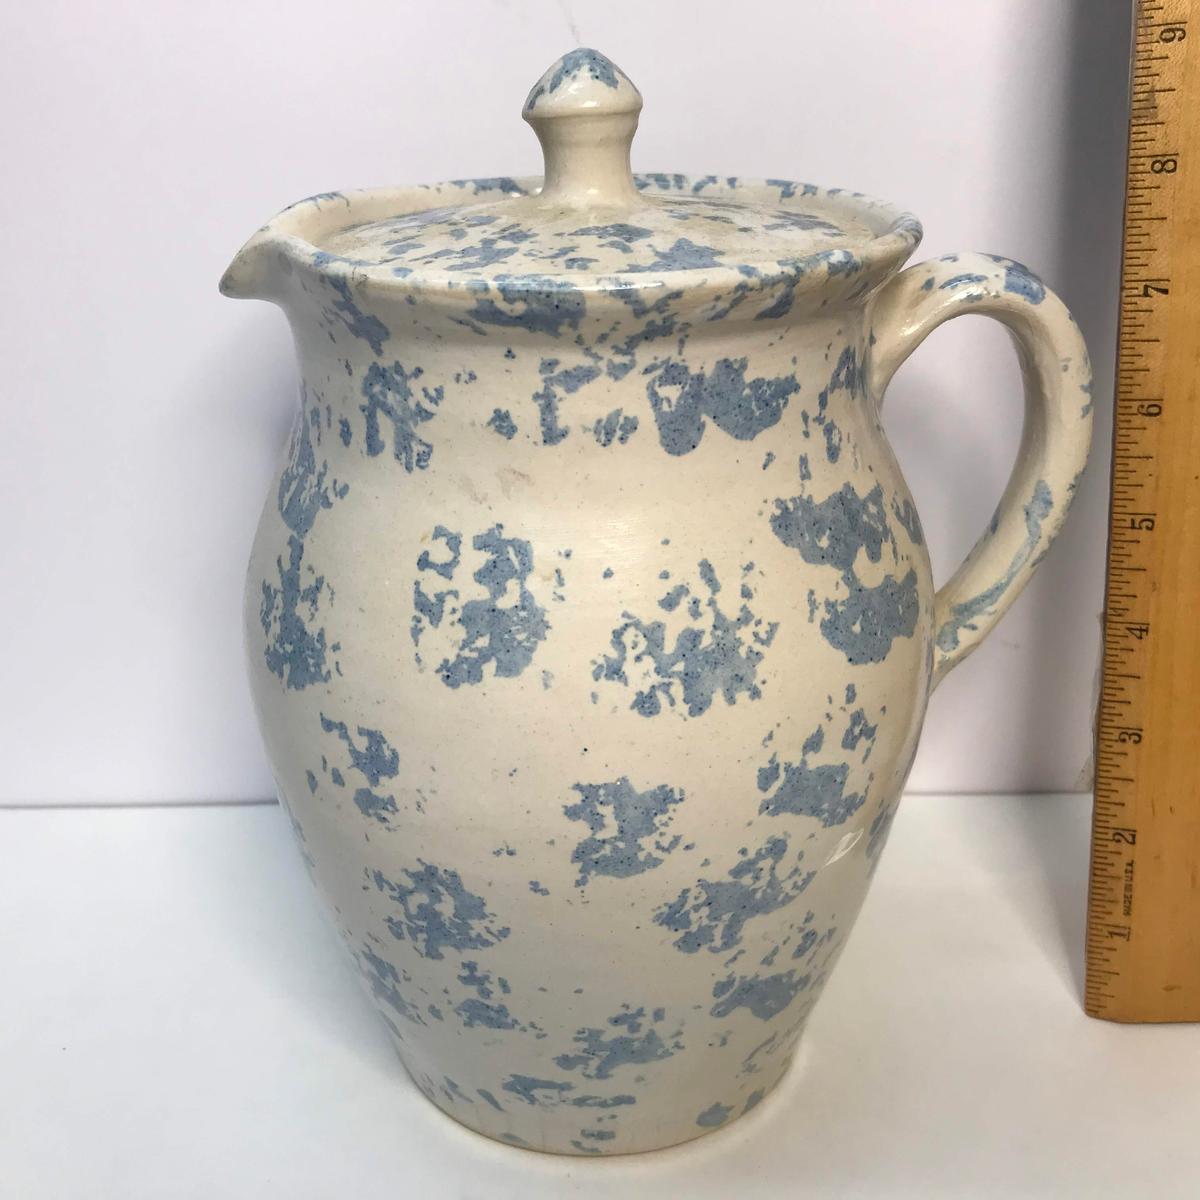 Evan’s Pottery Arden NC Blue Sponge Pitcher with Lid Signed on Bottom 9” tall